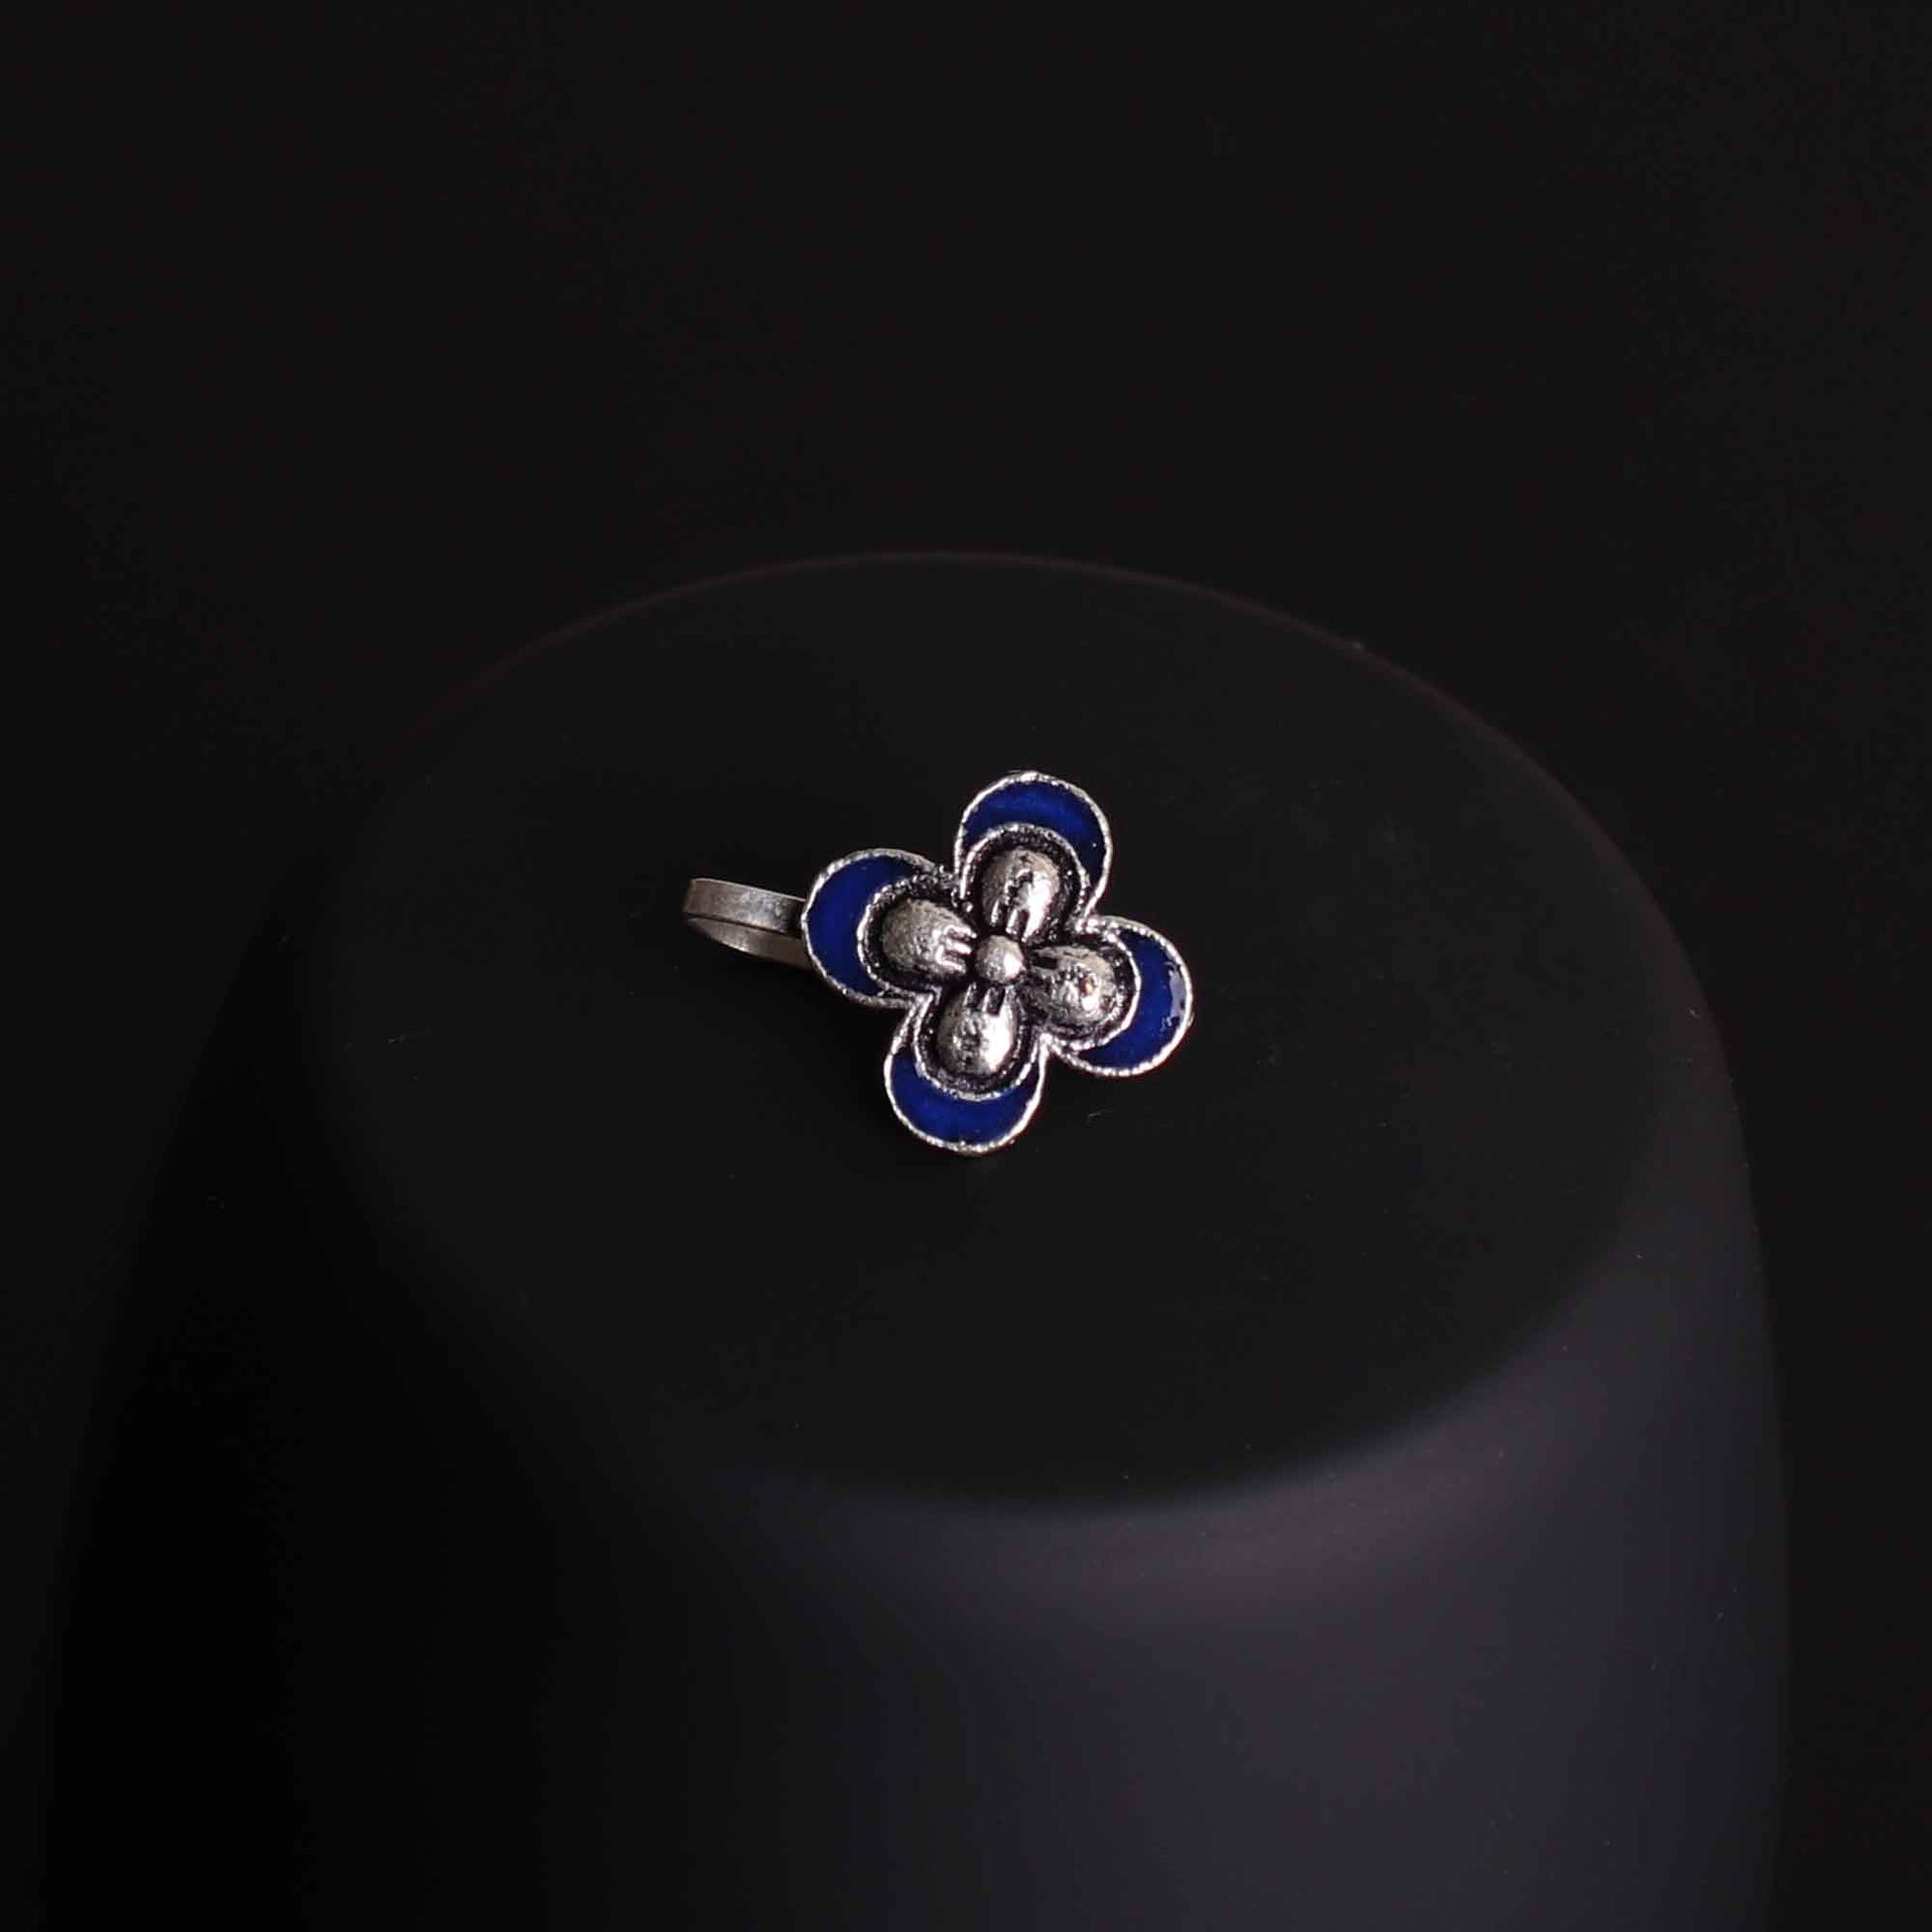 Nose Pin,The Butterfly Nose Pin in Dark Blue - Cippele Multi Store